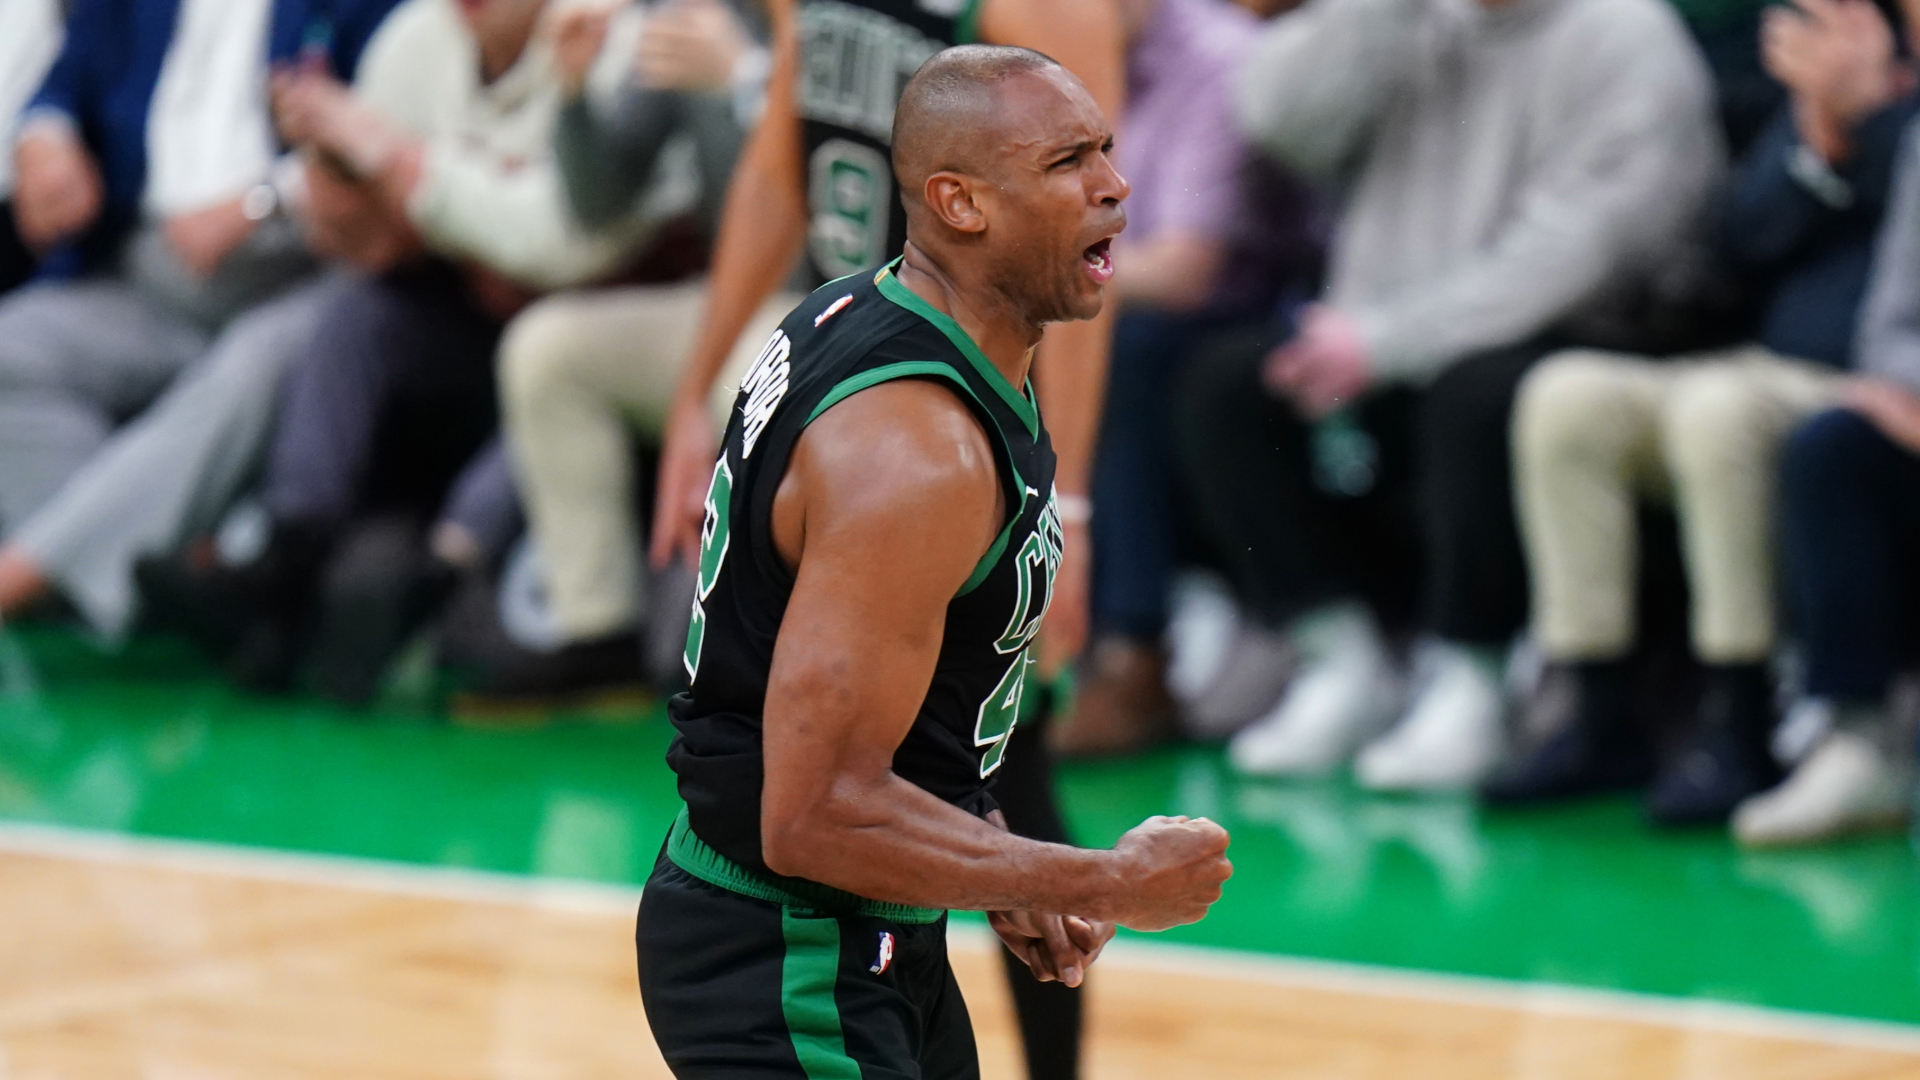 Celtics’ Al Horford Conquers Father Time With ‘Inspirational’
Game 5